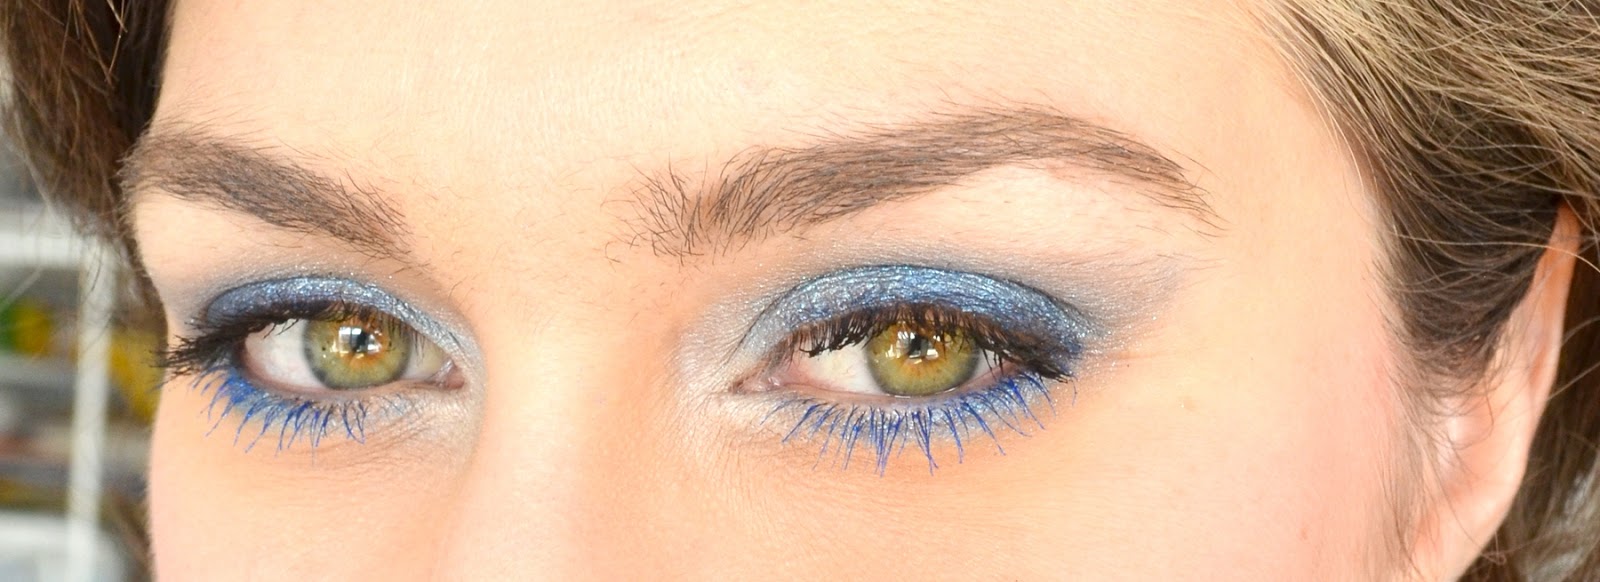 Chanel Stylo Eyeshadow 47 Blue Bay, Inimitable Waterproof Mascara 57 Blue  Note For Vibrant Blue Eyes This Summer